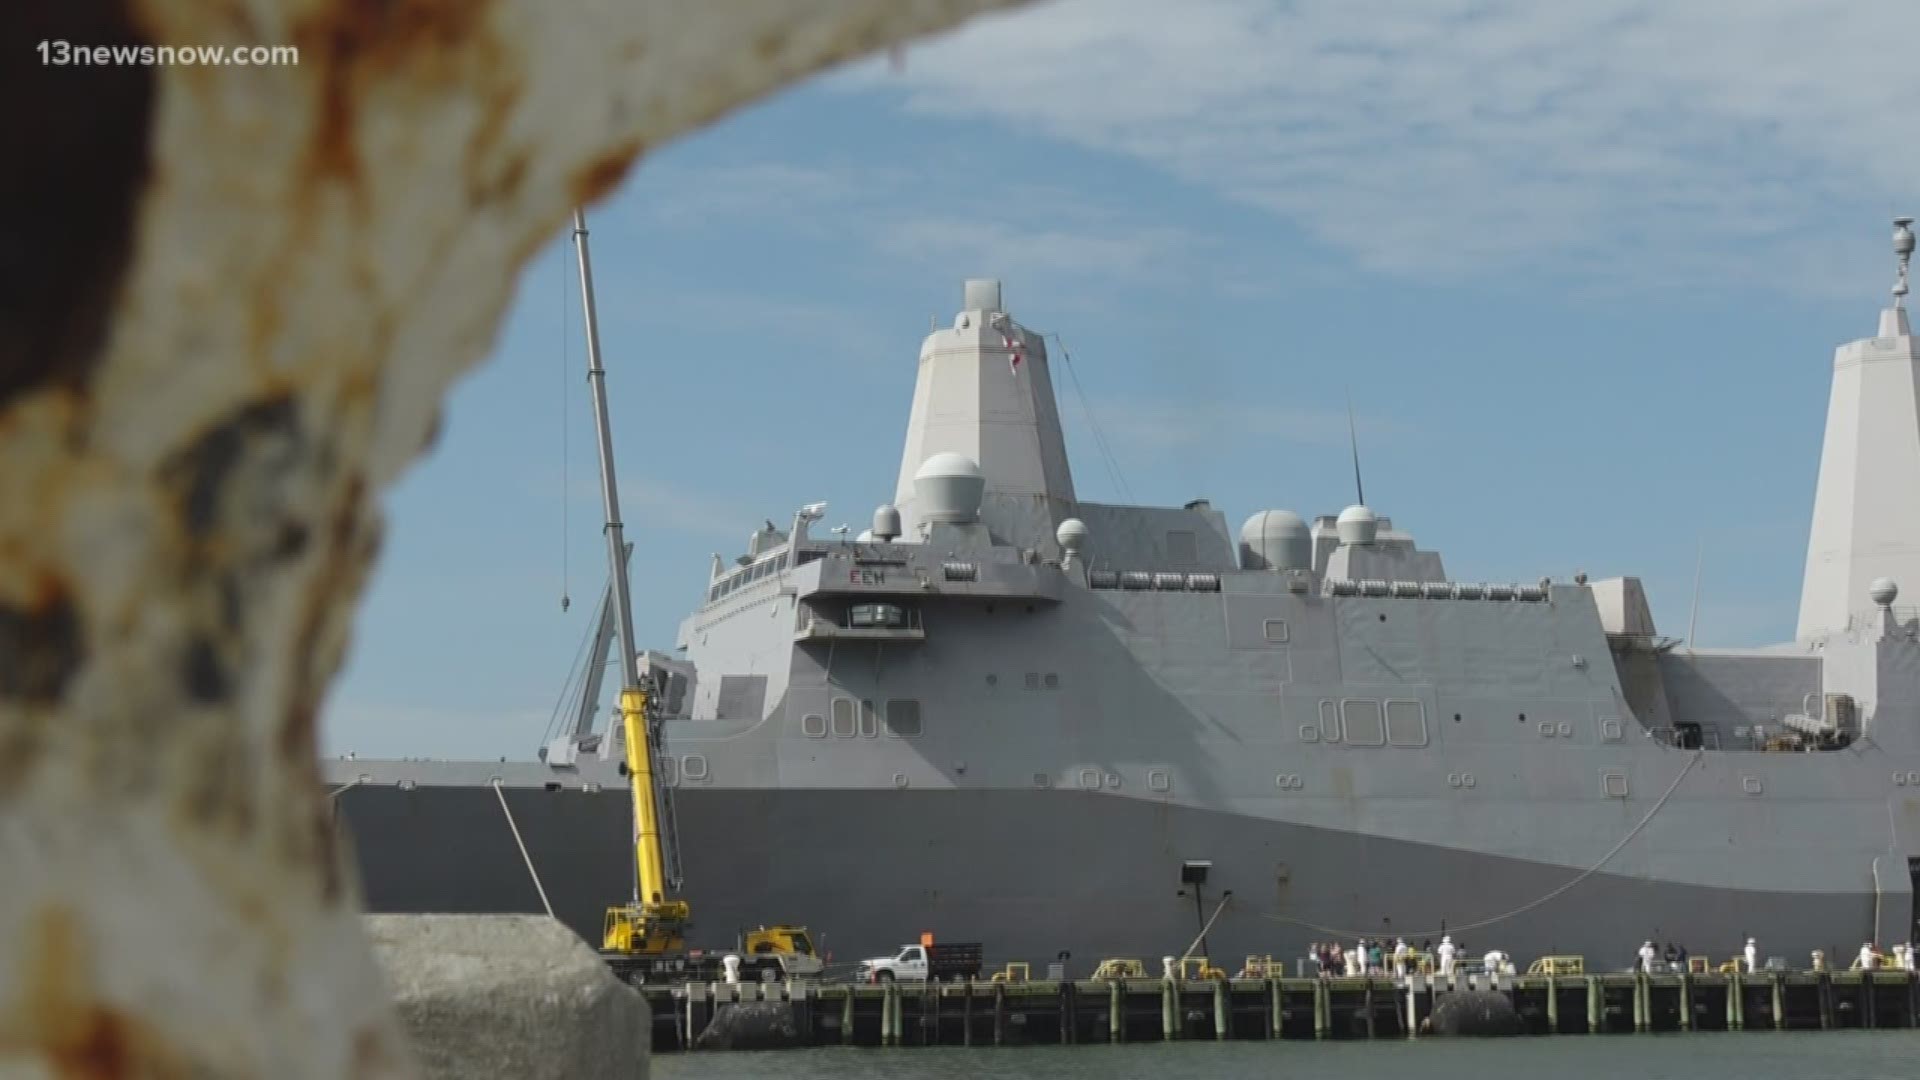 After a seven-month deployment, the Sailors and Marines returned to Naval Station Norfolk.